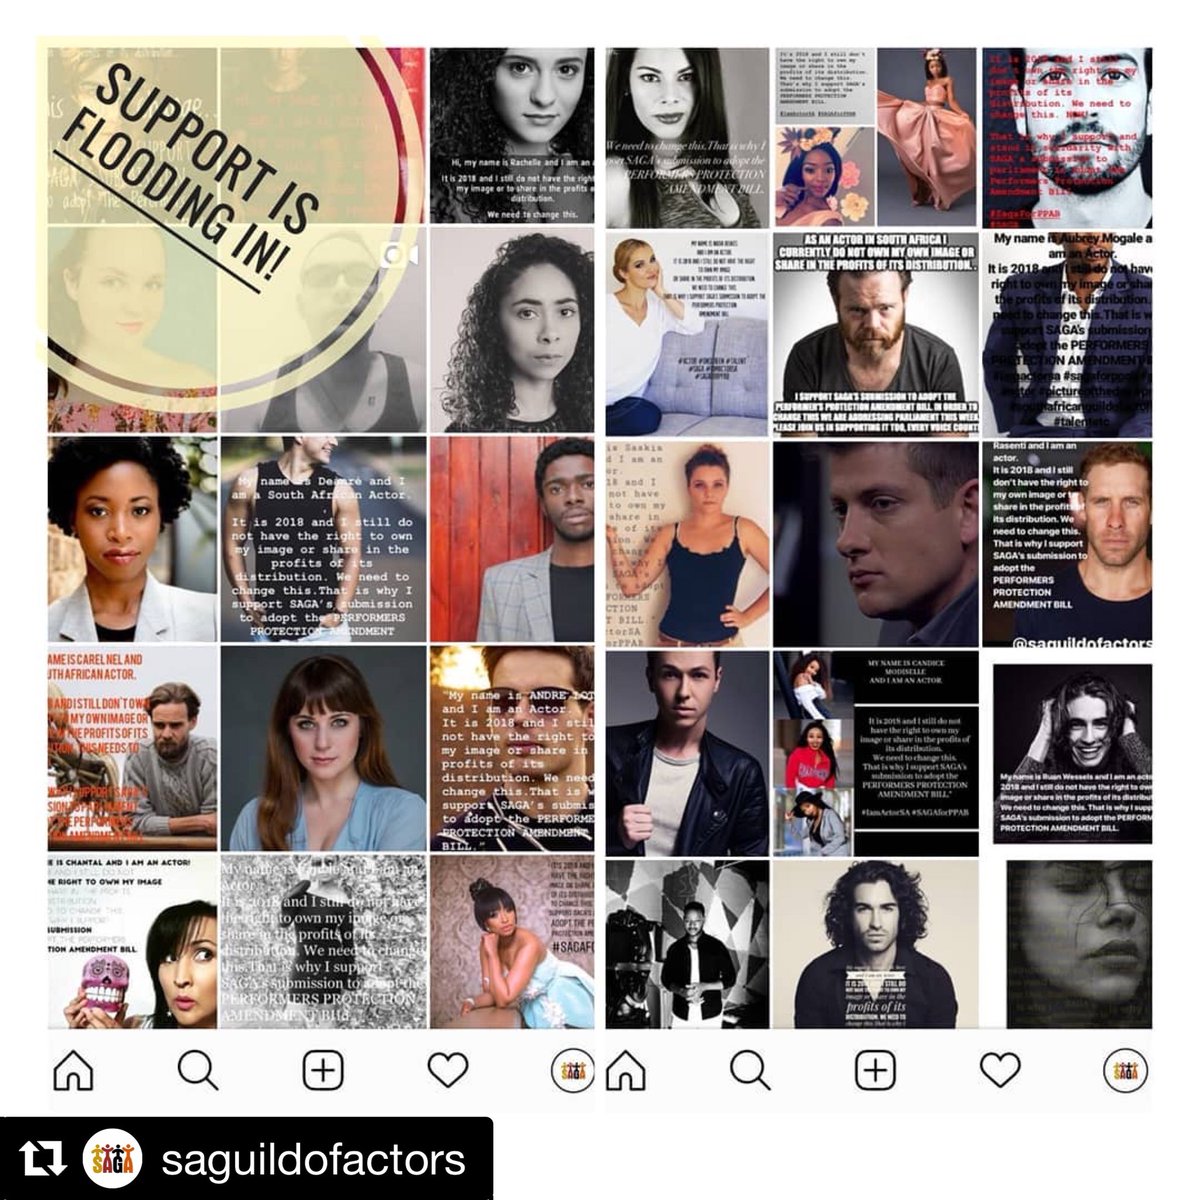 It’s important to us. We make tv, film, theatre for the people. Yes, we love it and live for our craft, but fair is fair. Support the people that bring you stories and characters that you love. You, the viewer, are important to us. #supportus @SAGuildofActors #sagaforppab ☑☑☑